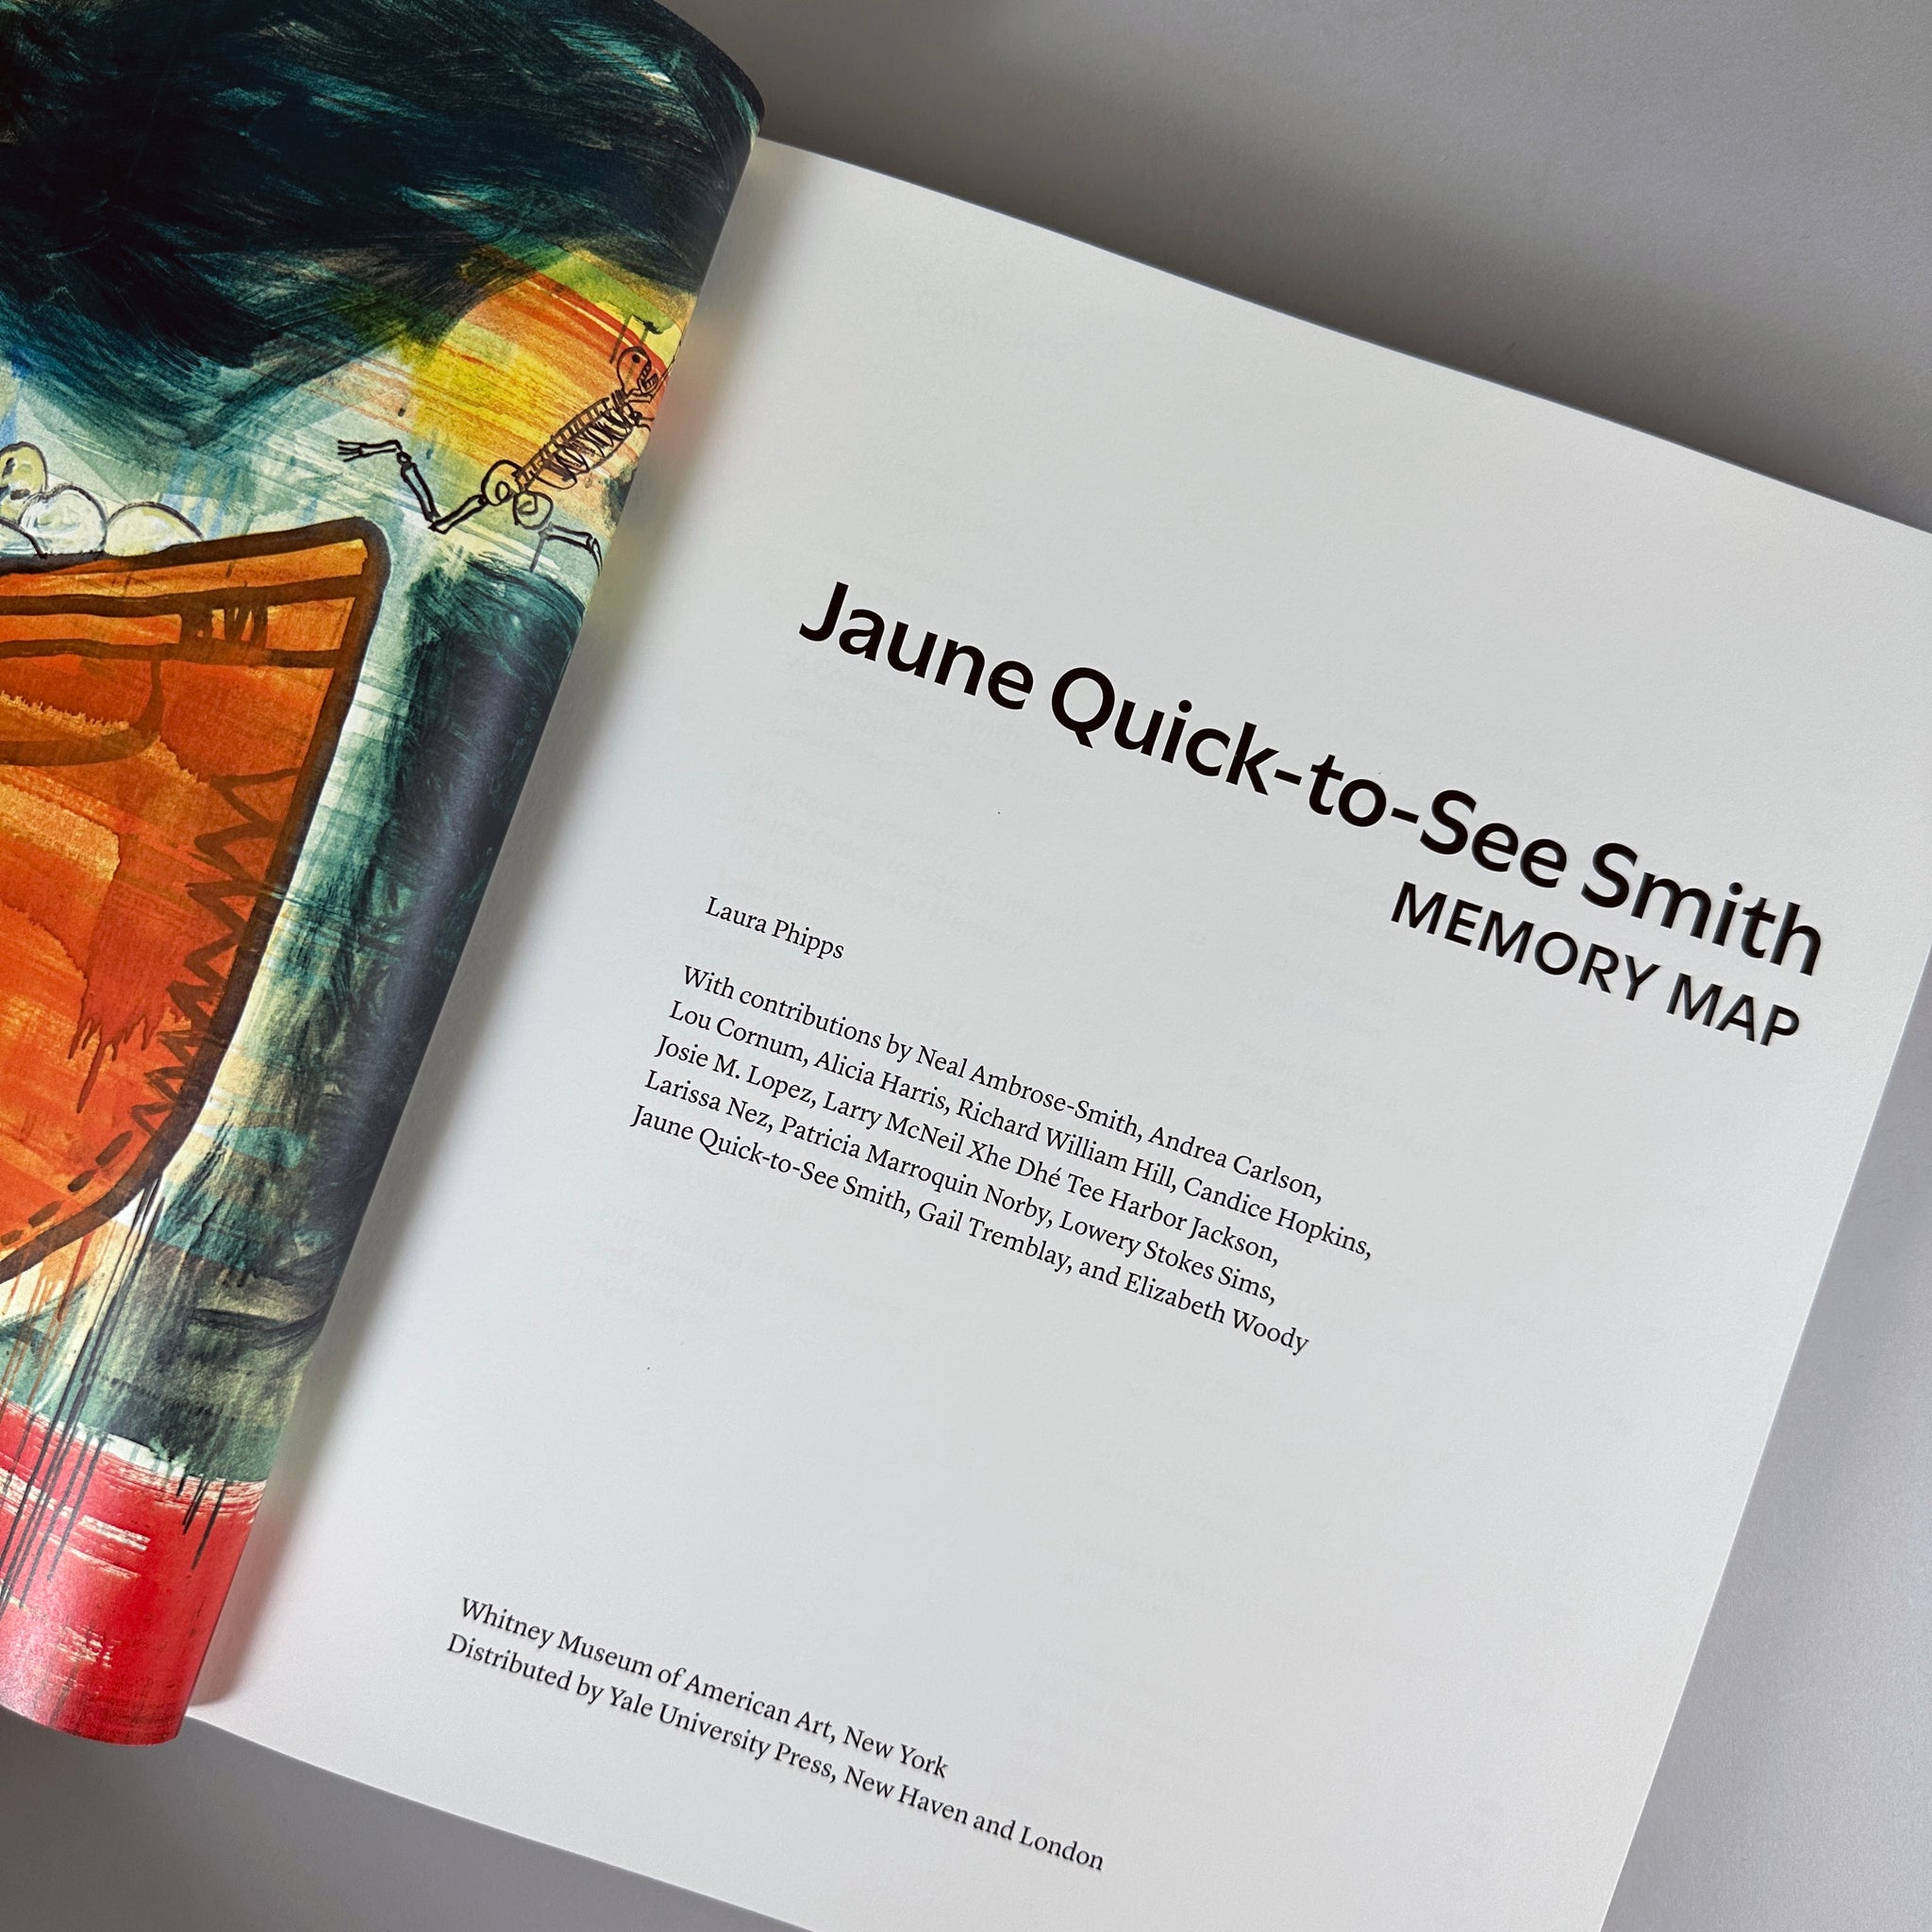 Jaune Quick-to-See Smith: Memory Map